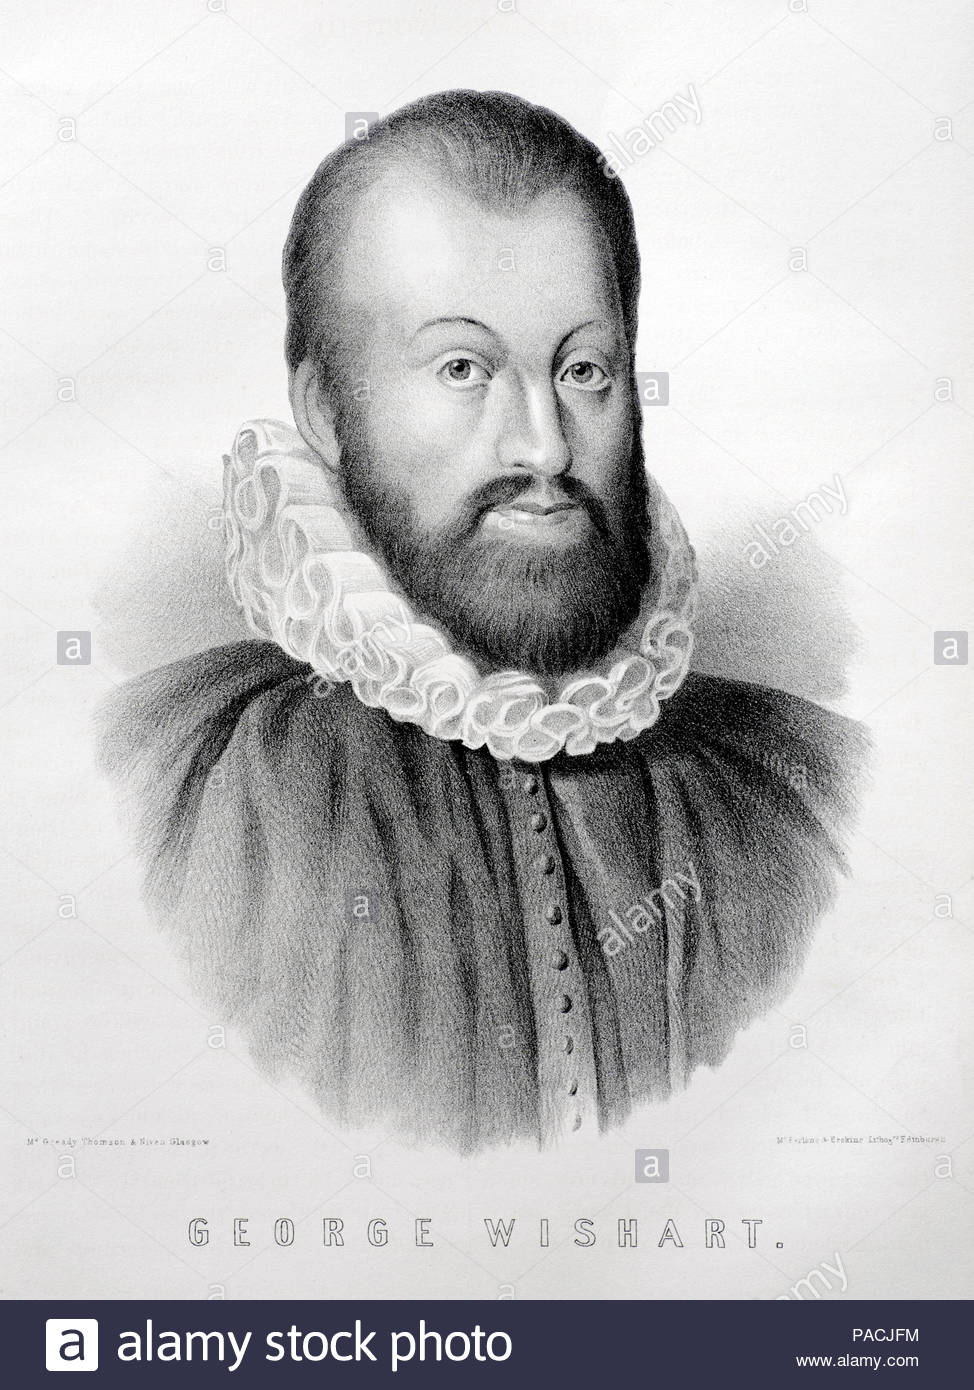 George Wishart portrait, 1513 – 1546, was a Scottish religious reformer and Protestant martyr, antique engraving from 1879 Stock Photo